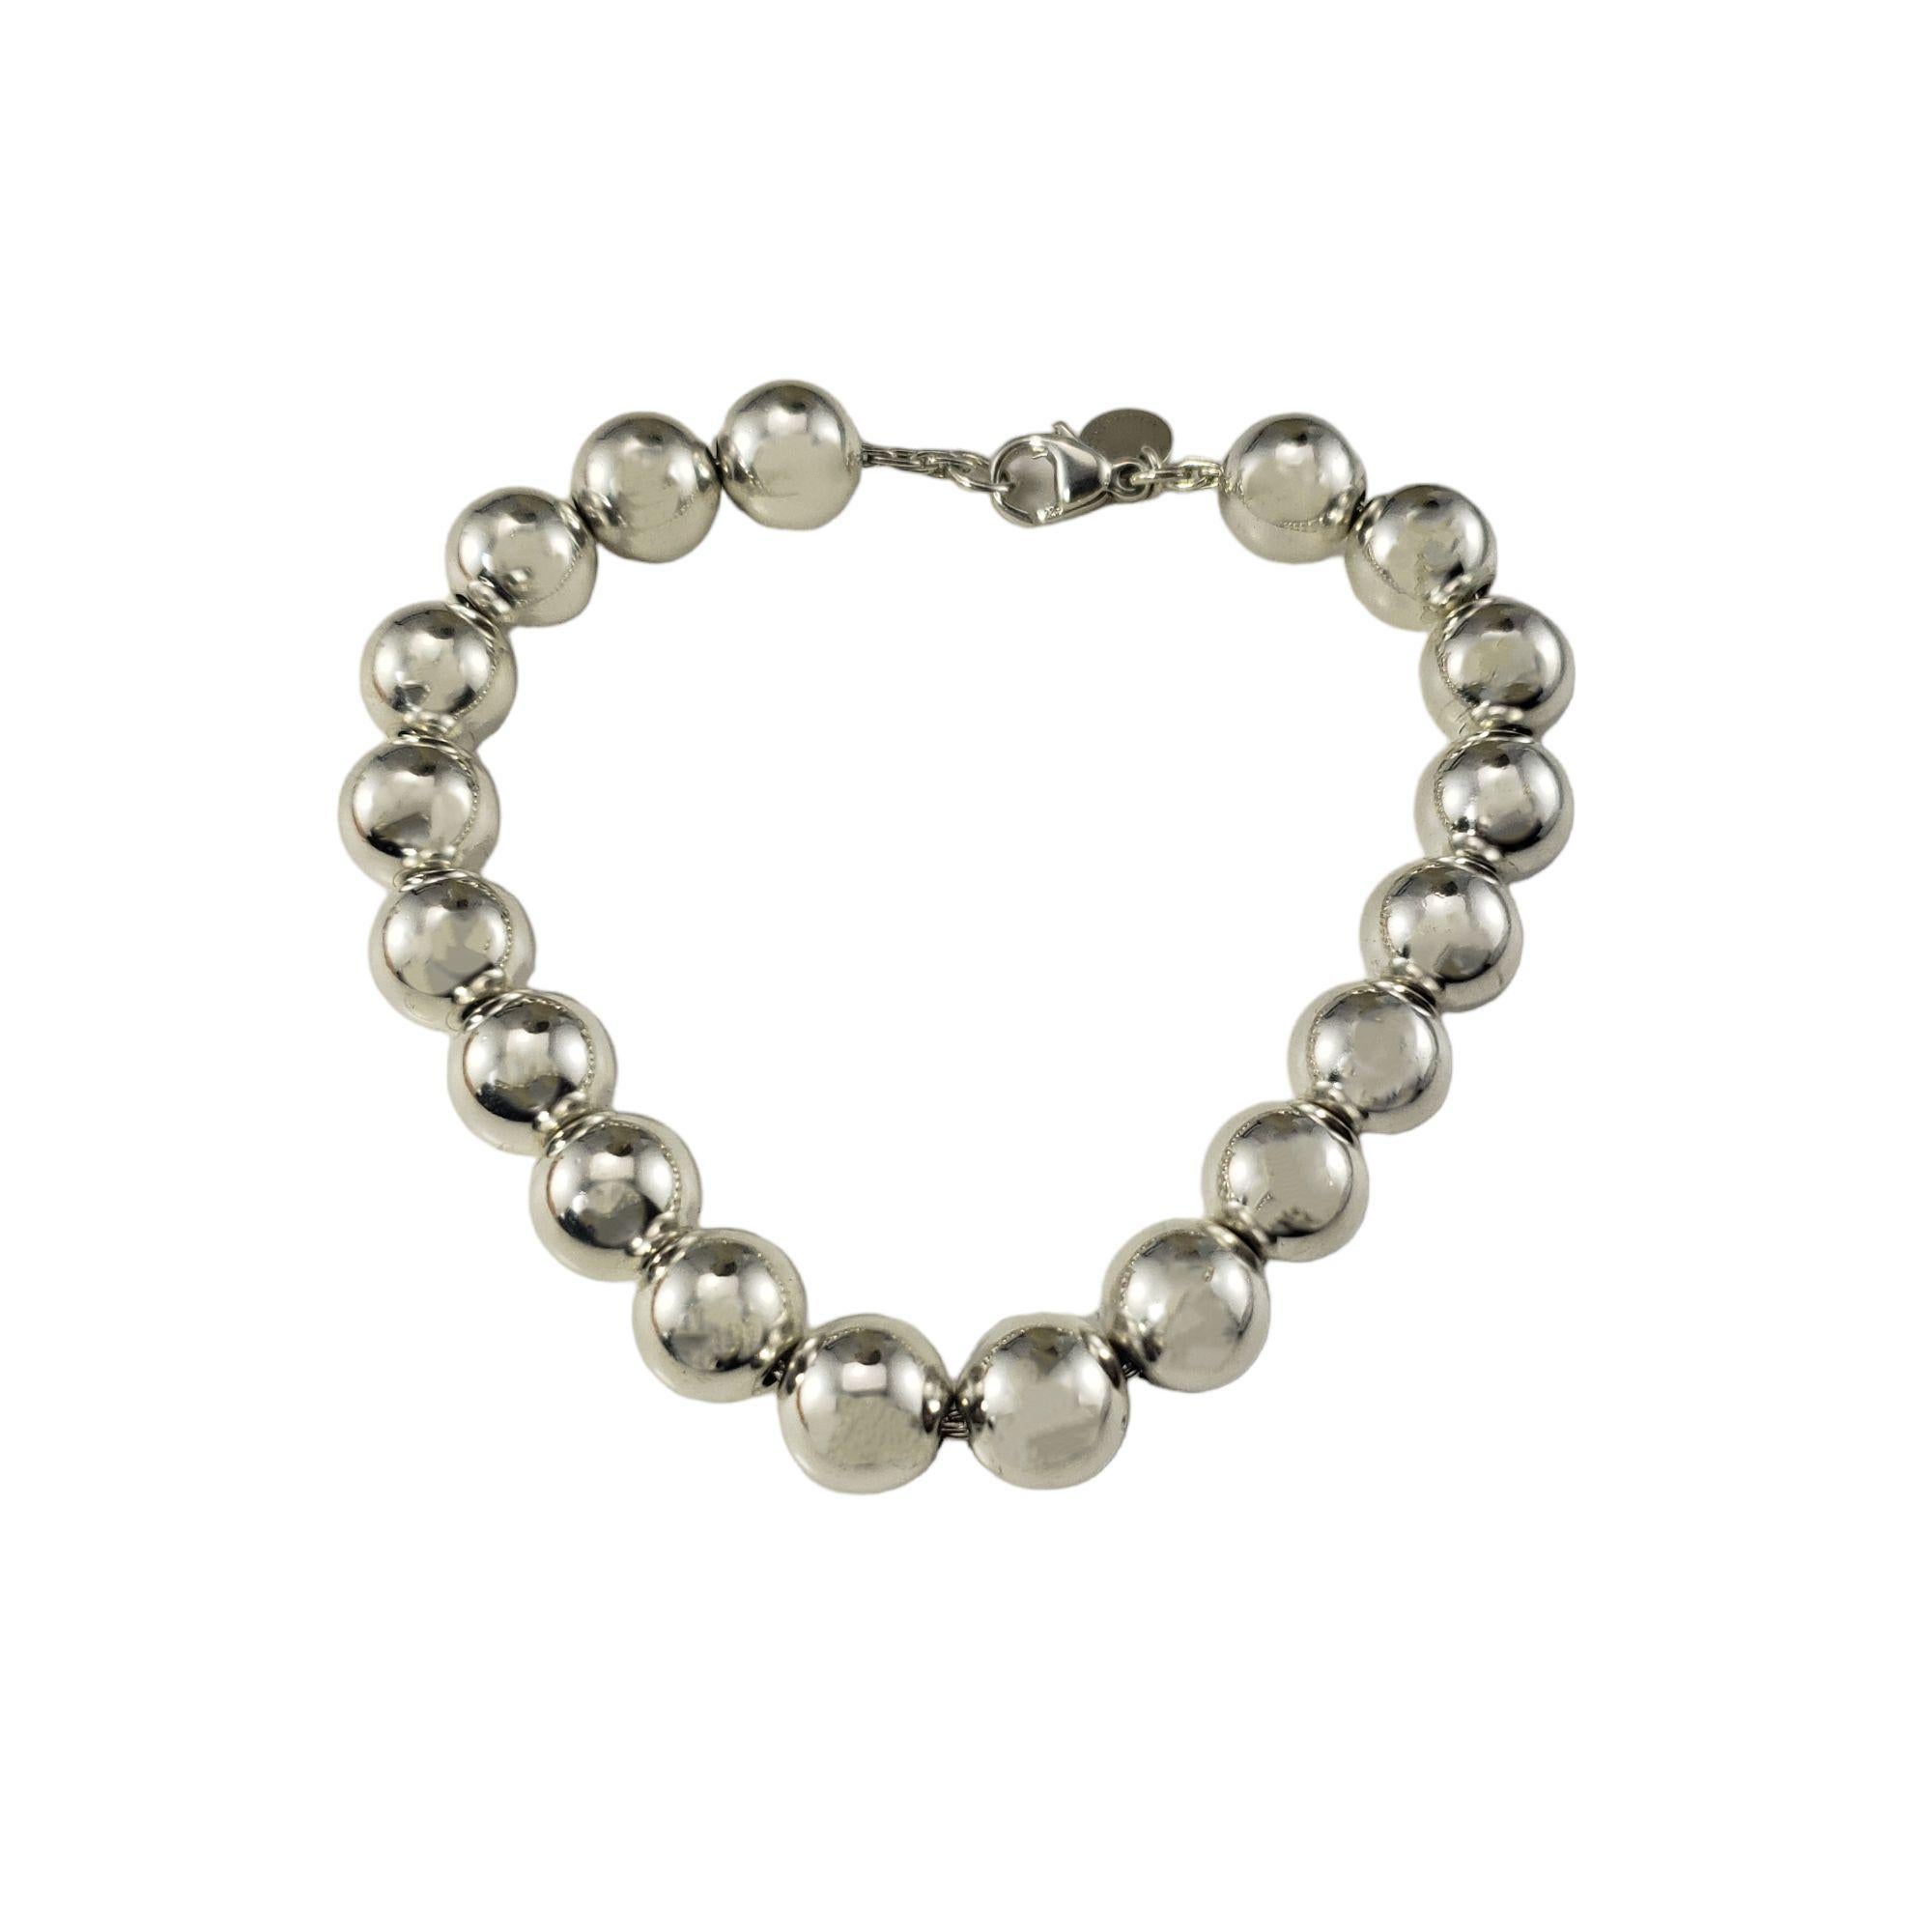 Tiffany & Co. Sterling Silver Beaded Bracelet-

This lovely beaded bracelet by Tiffany & Co. is crafted in classic sterling silver. Width: 10 mm.

Size: 7.25 inches

Weight: 20.5 gr./ 13.2 dwt.

Hallmark: Tiffany & Co. 925

Very good condition,